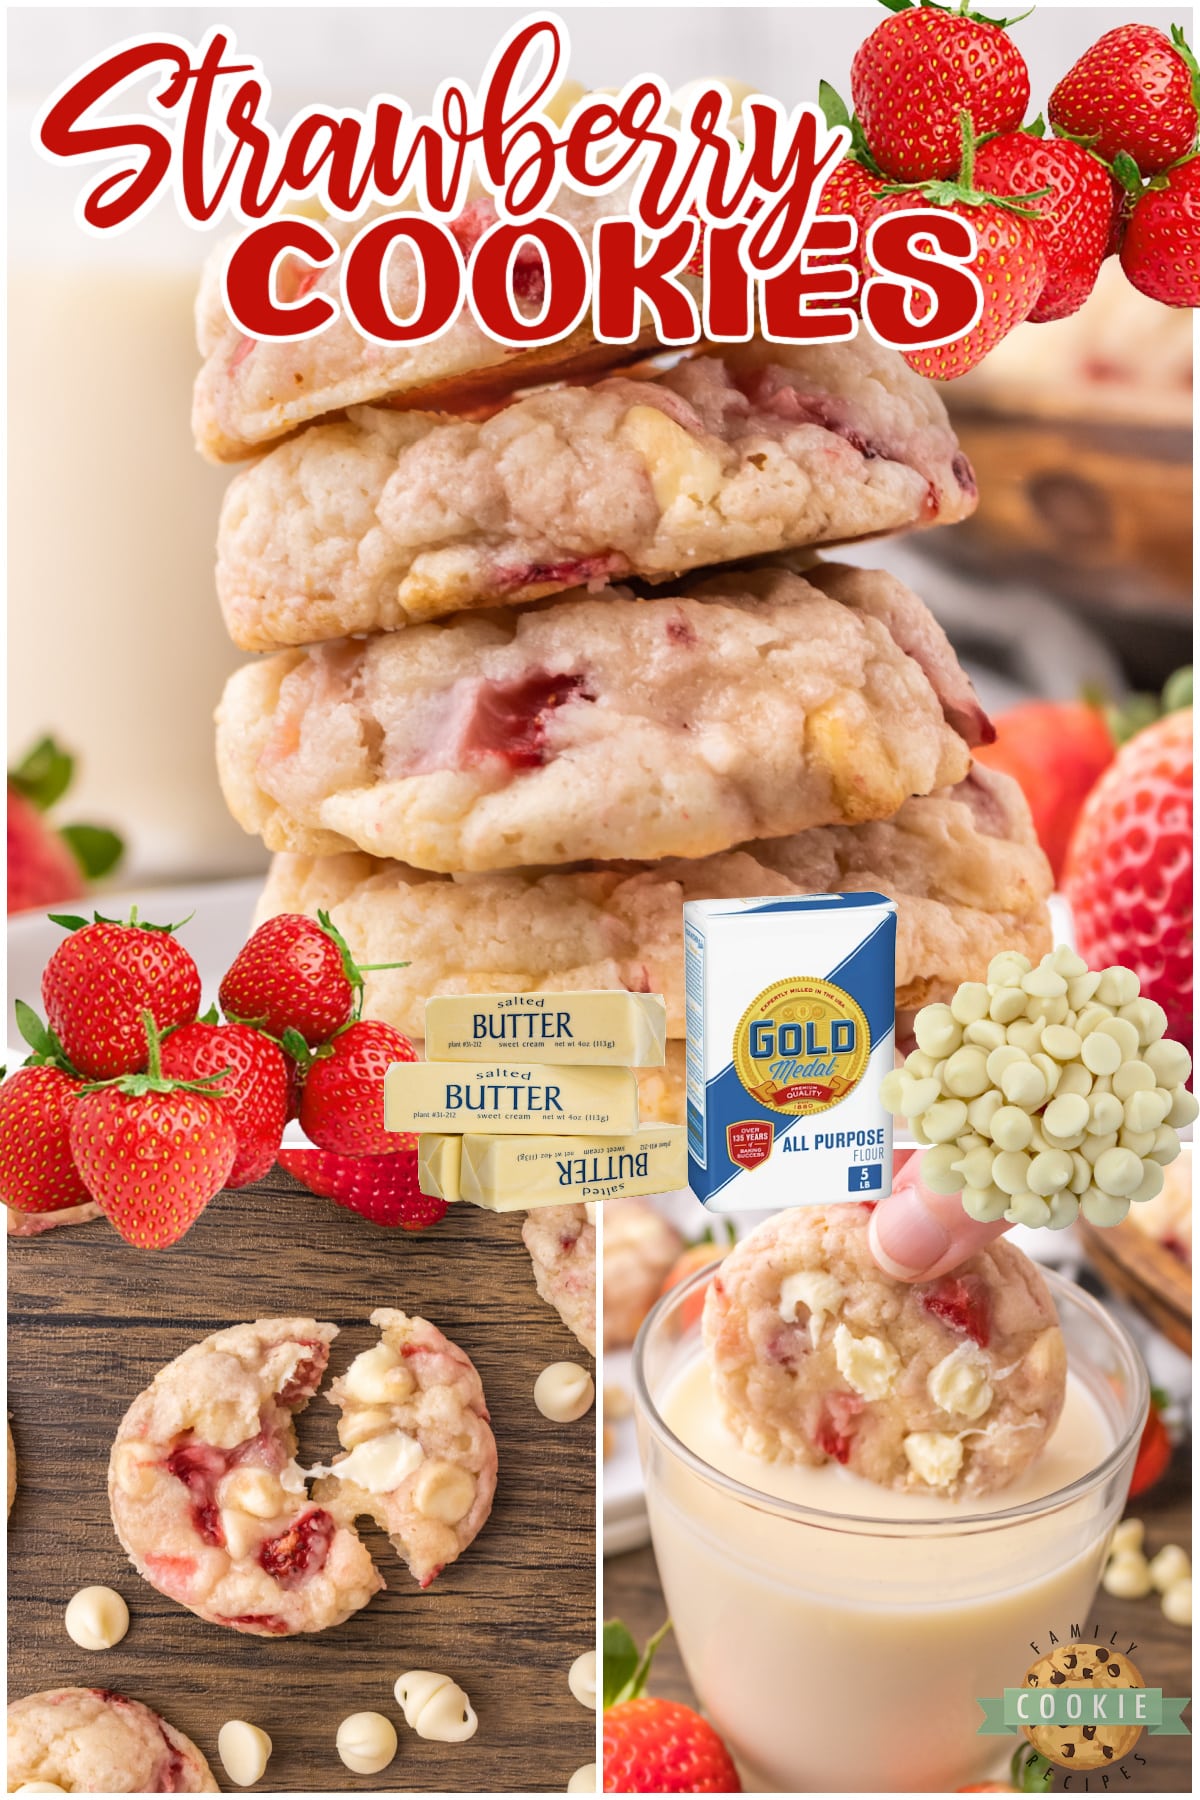 Strawberry Cookies made completely from scratch with fresh strawberries and white chocolate chips! Delicious strawberry cookie recipe made with simple ingredients. 